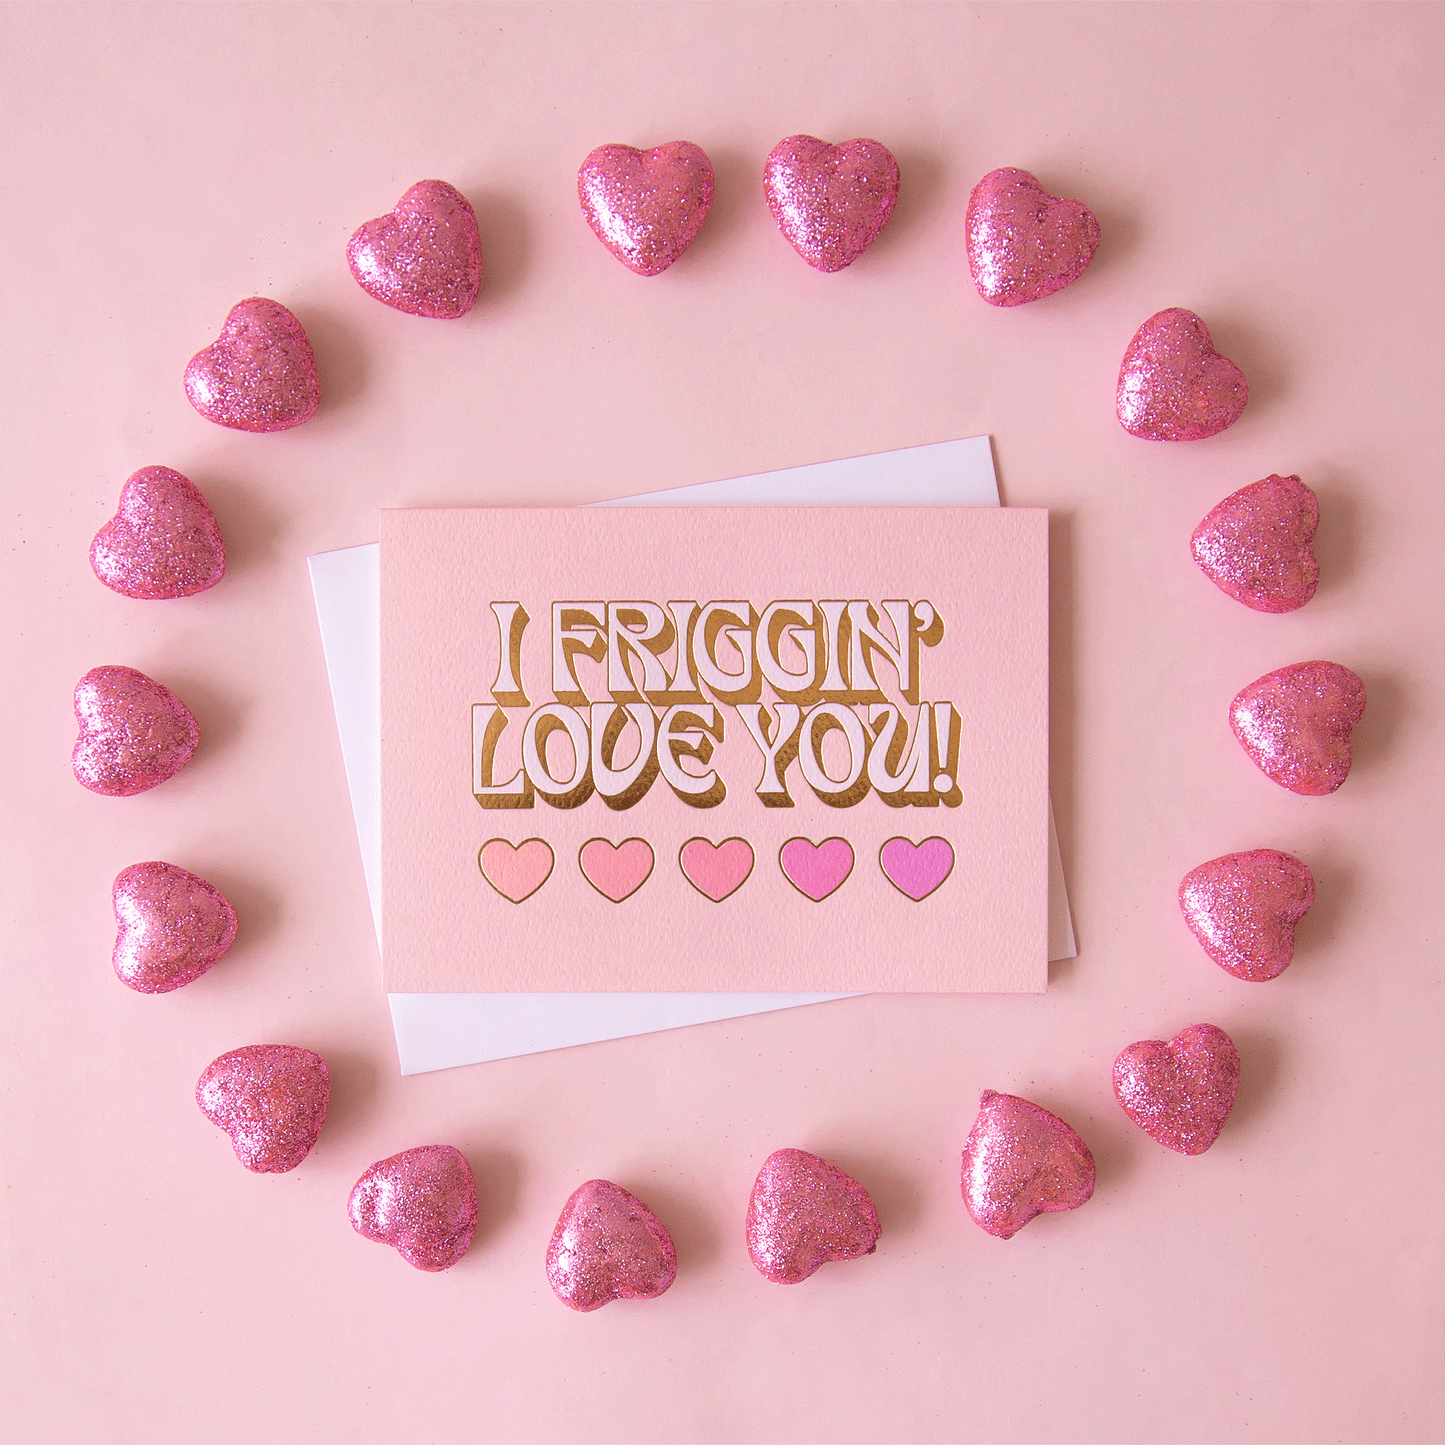 On a pink background is a light pink card with text that reads, "I Friggin' Love You!" with five hearts underneath.